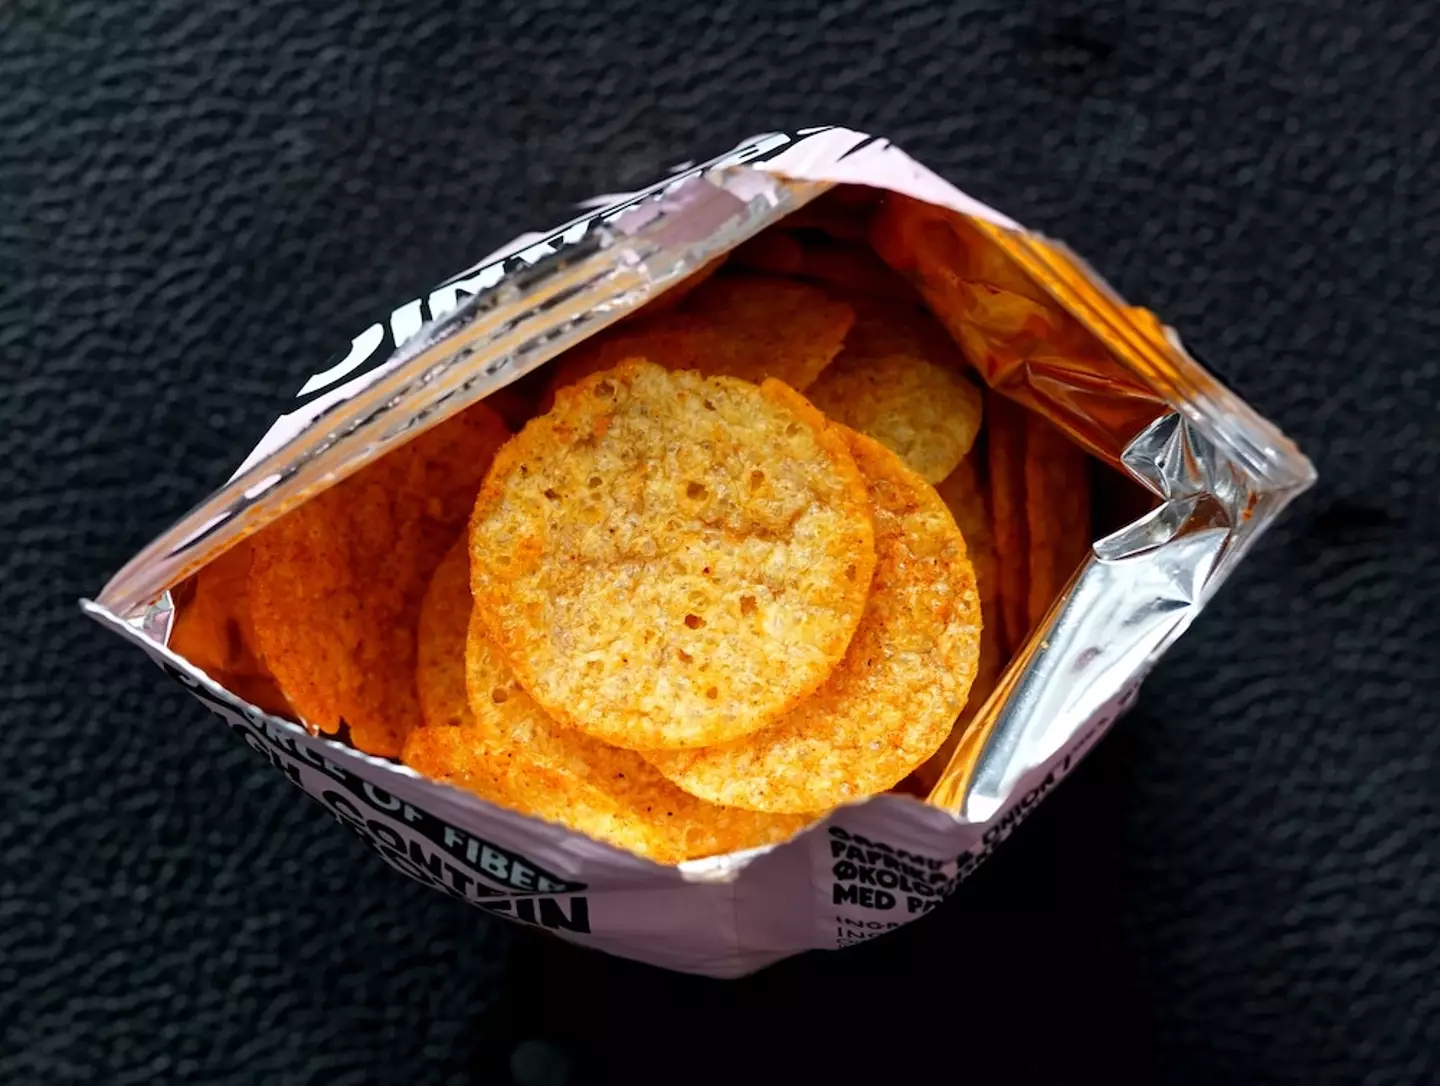 Some people questioned what 'adult' crisps are.